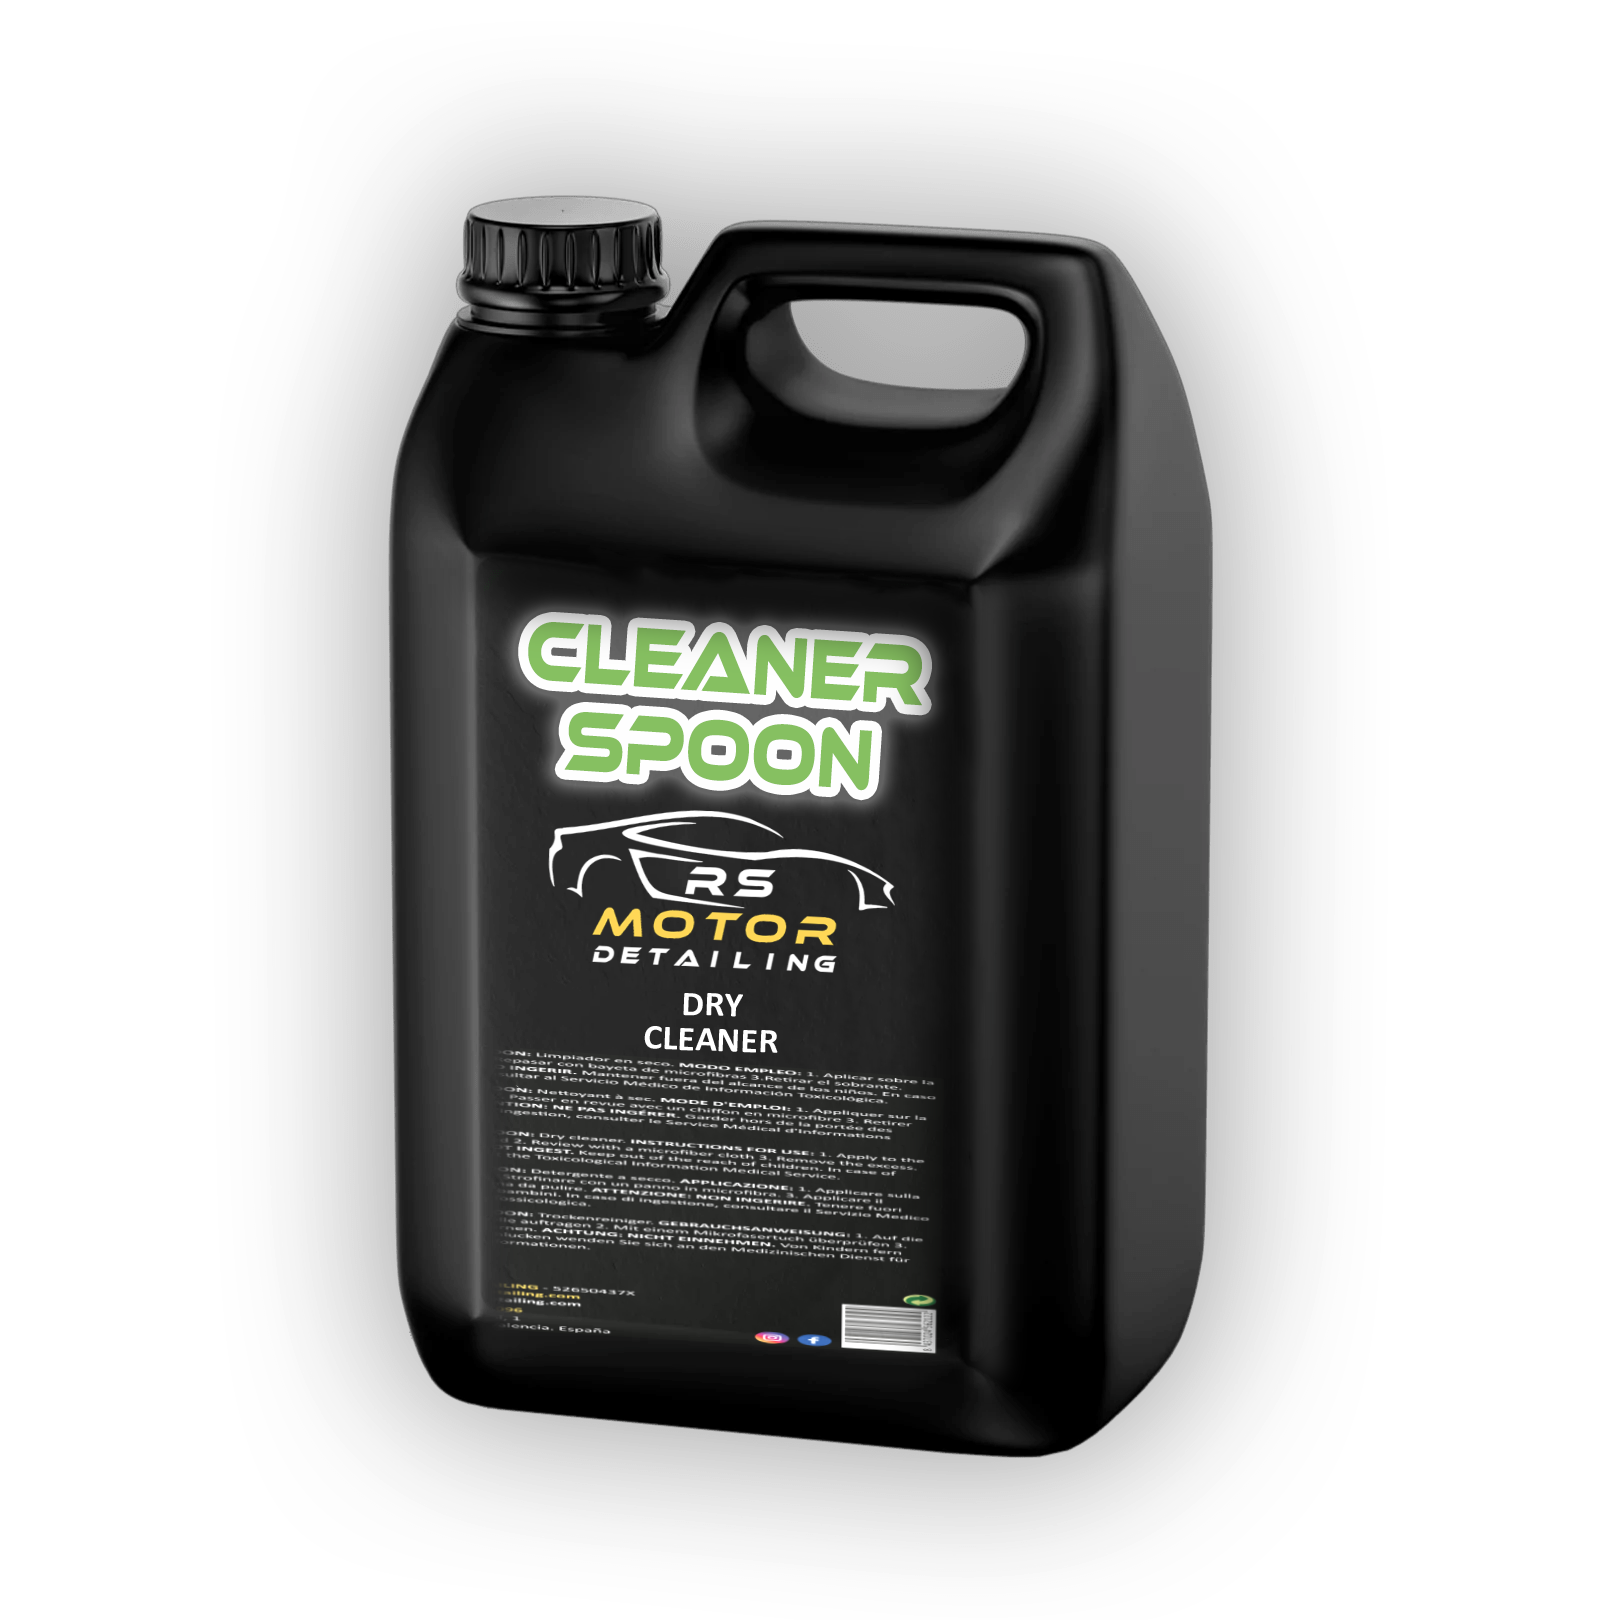 CLEANER SPOON 5L - Limpeza a seco